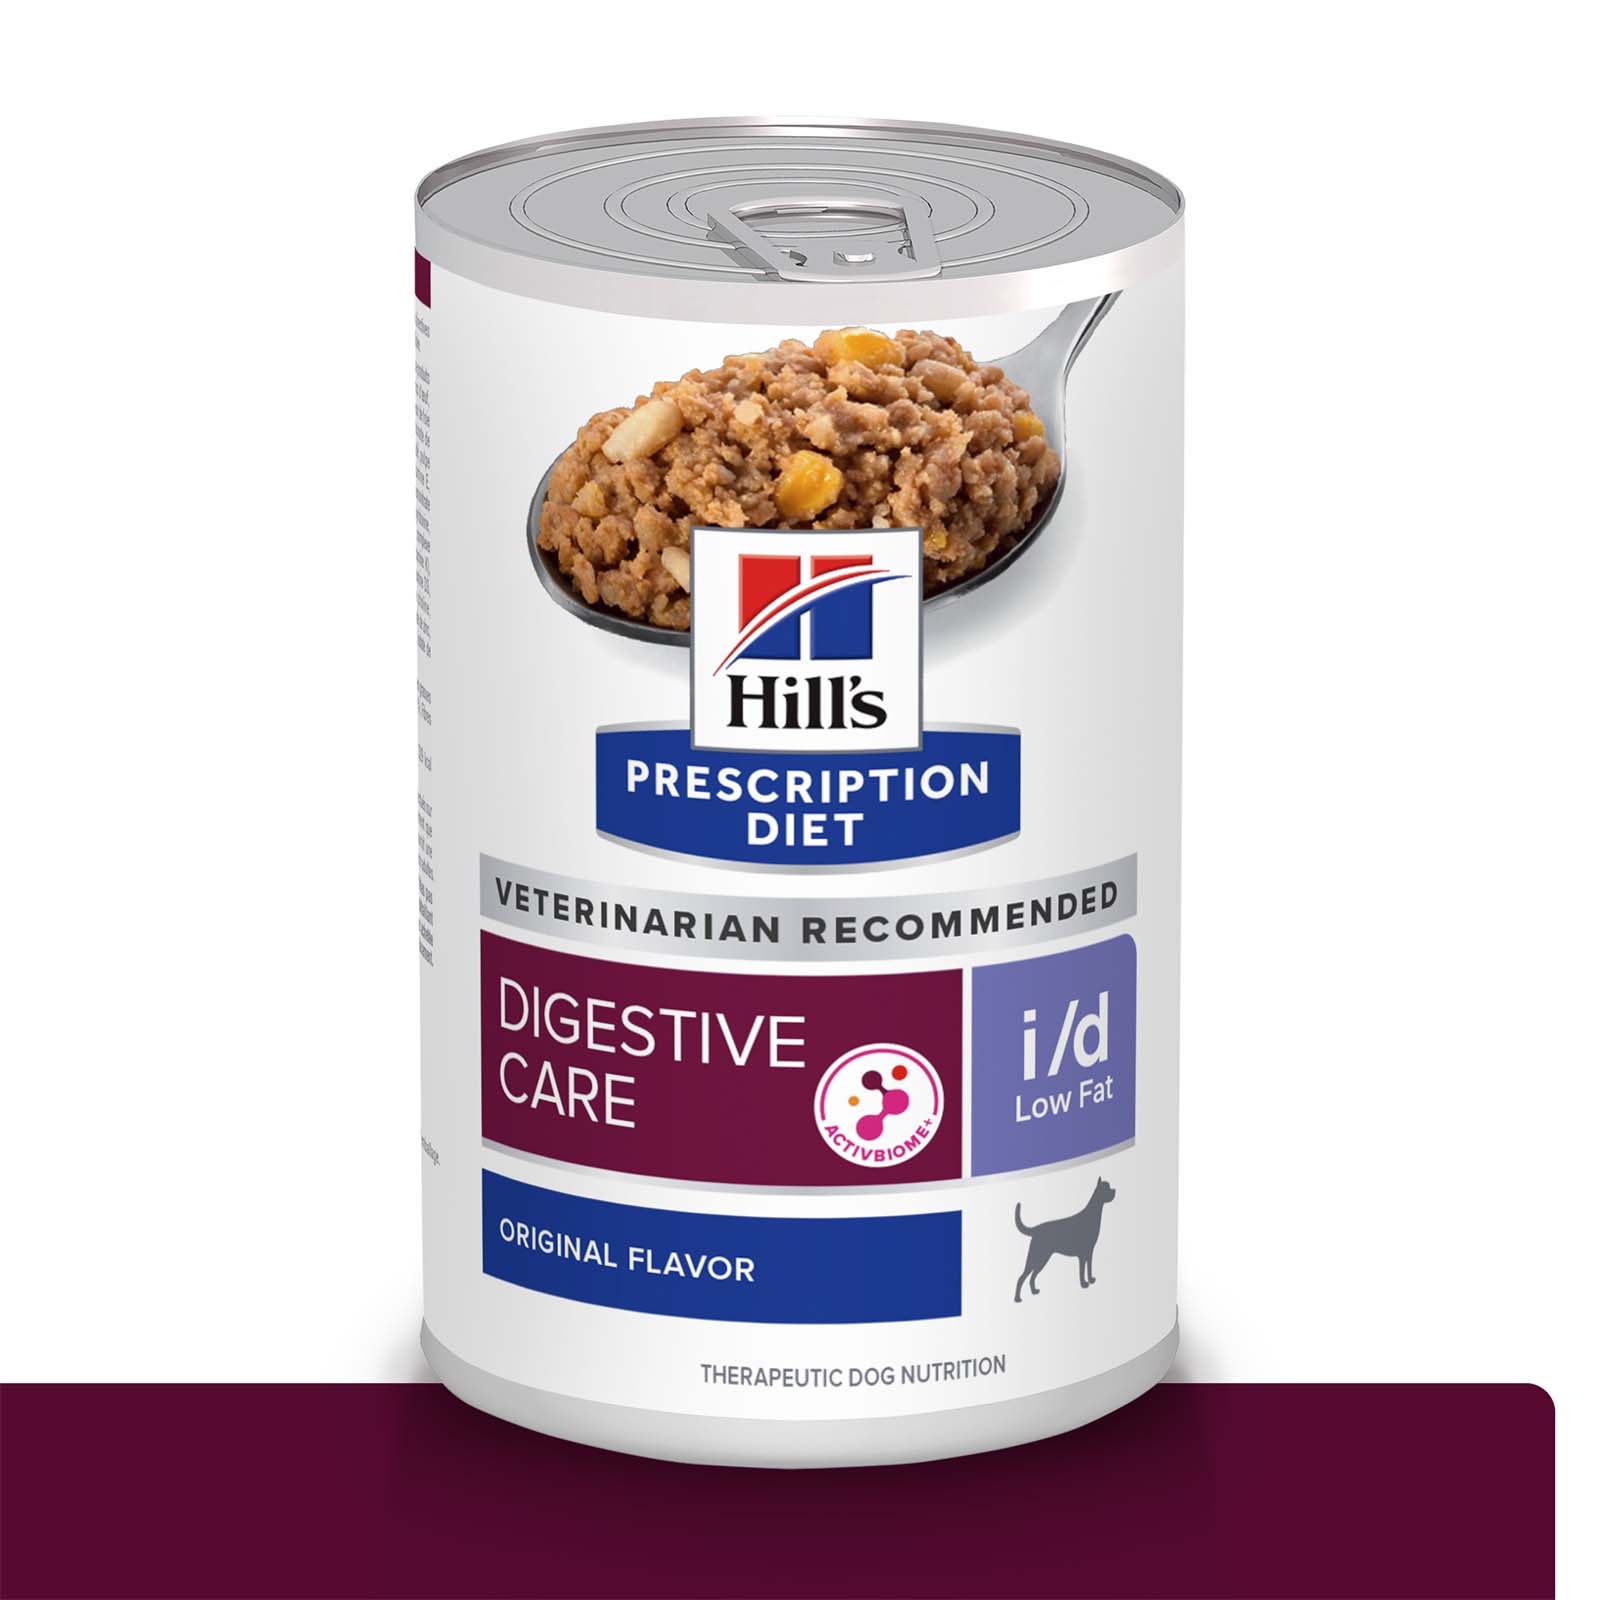 Hill's Prescription Diet i/d Low Fat Digestive Care Canned Dog Food 360 Gm